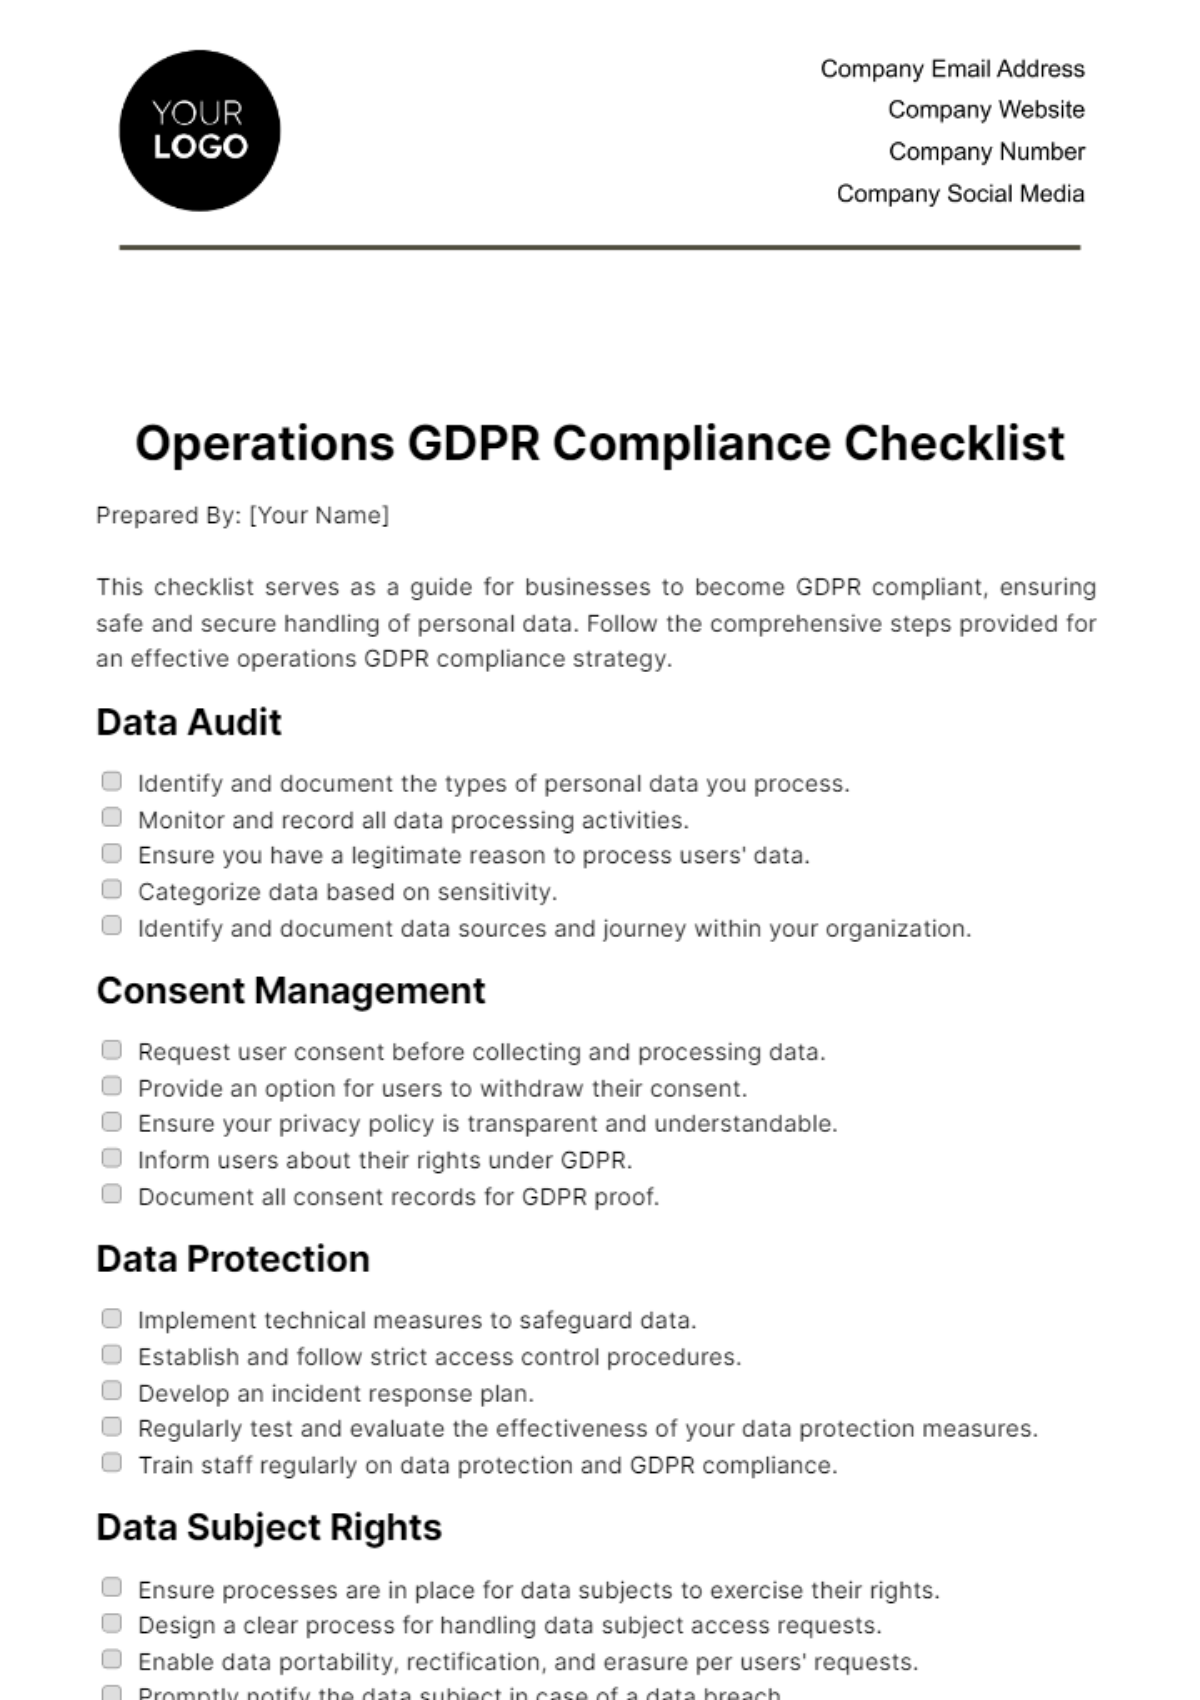 Operations GDPR Compliance Checklist Template